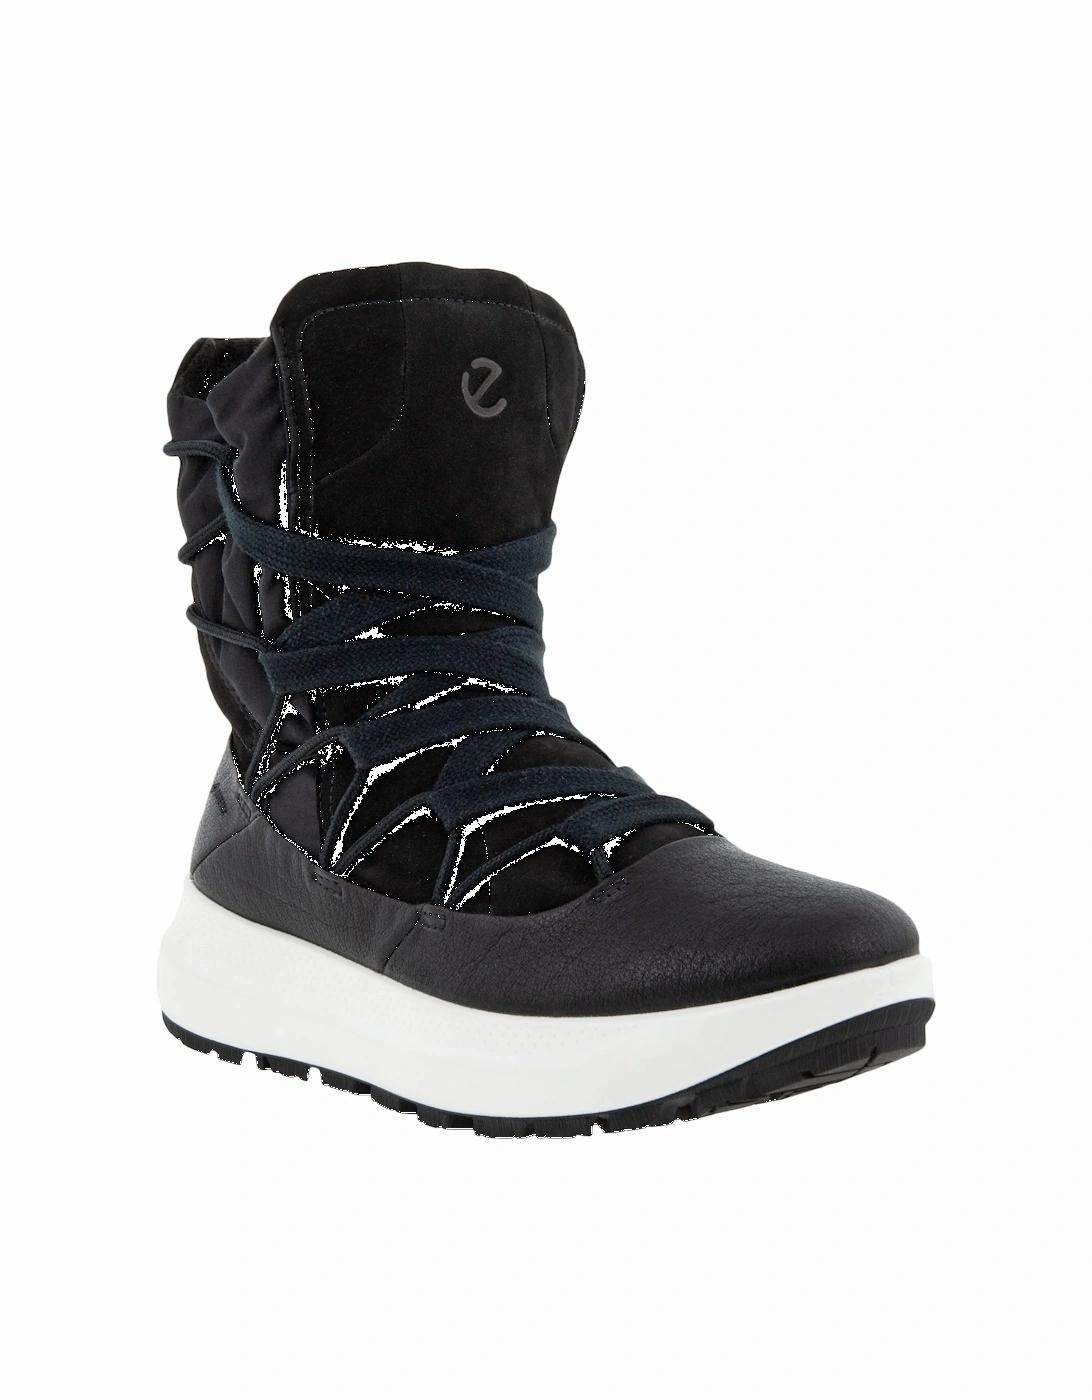 Womens Solice GORE-TEX Winter High Rise Boots